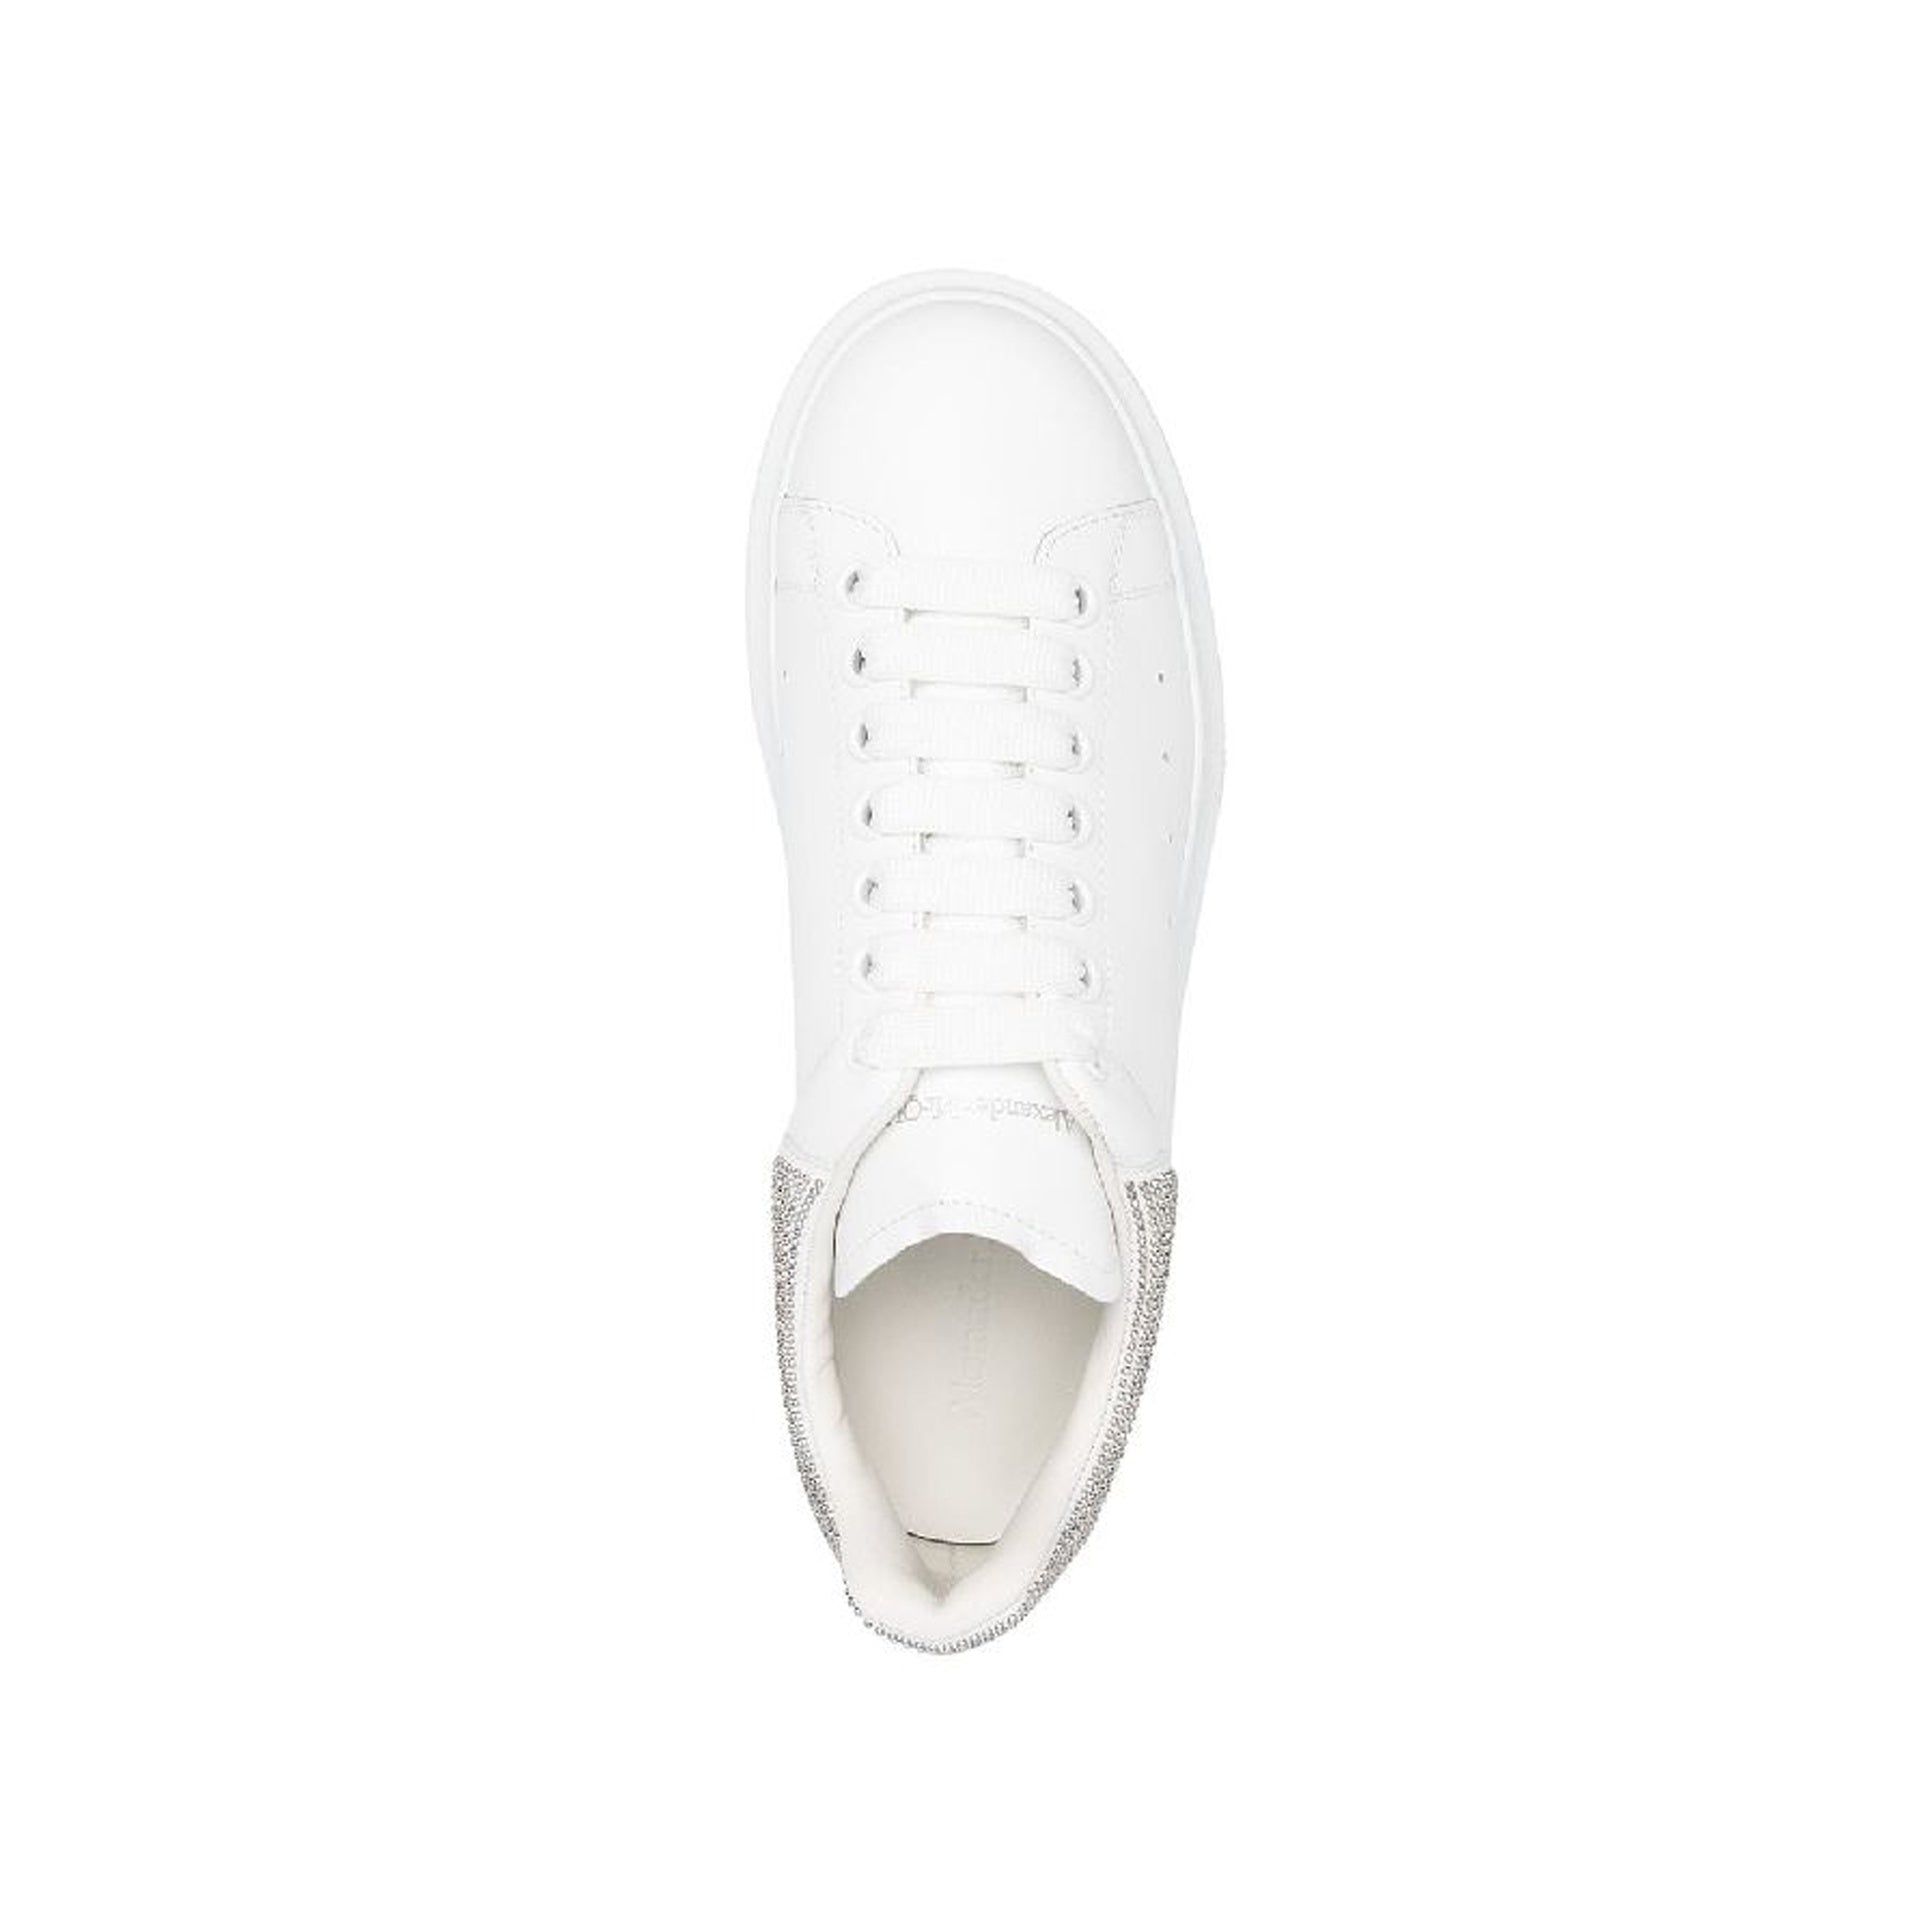 ALEXANDER-MCQUEEN-OUTLET-SALE-Alexander-McQueen-Studded-Oversized-Sneakers-Sneakers-WHITE-49-ARCHIVE-COLLECTION-4.jpg